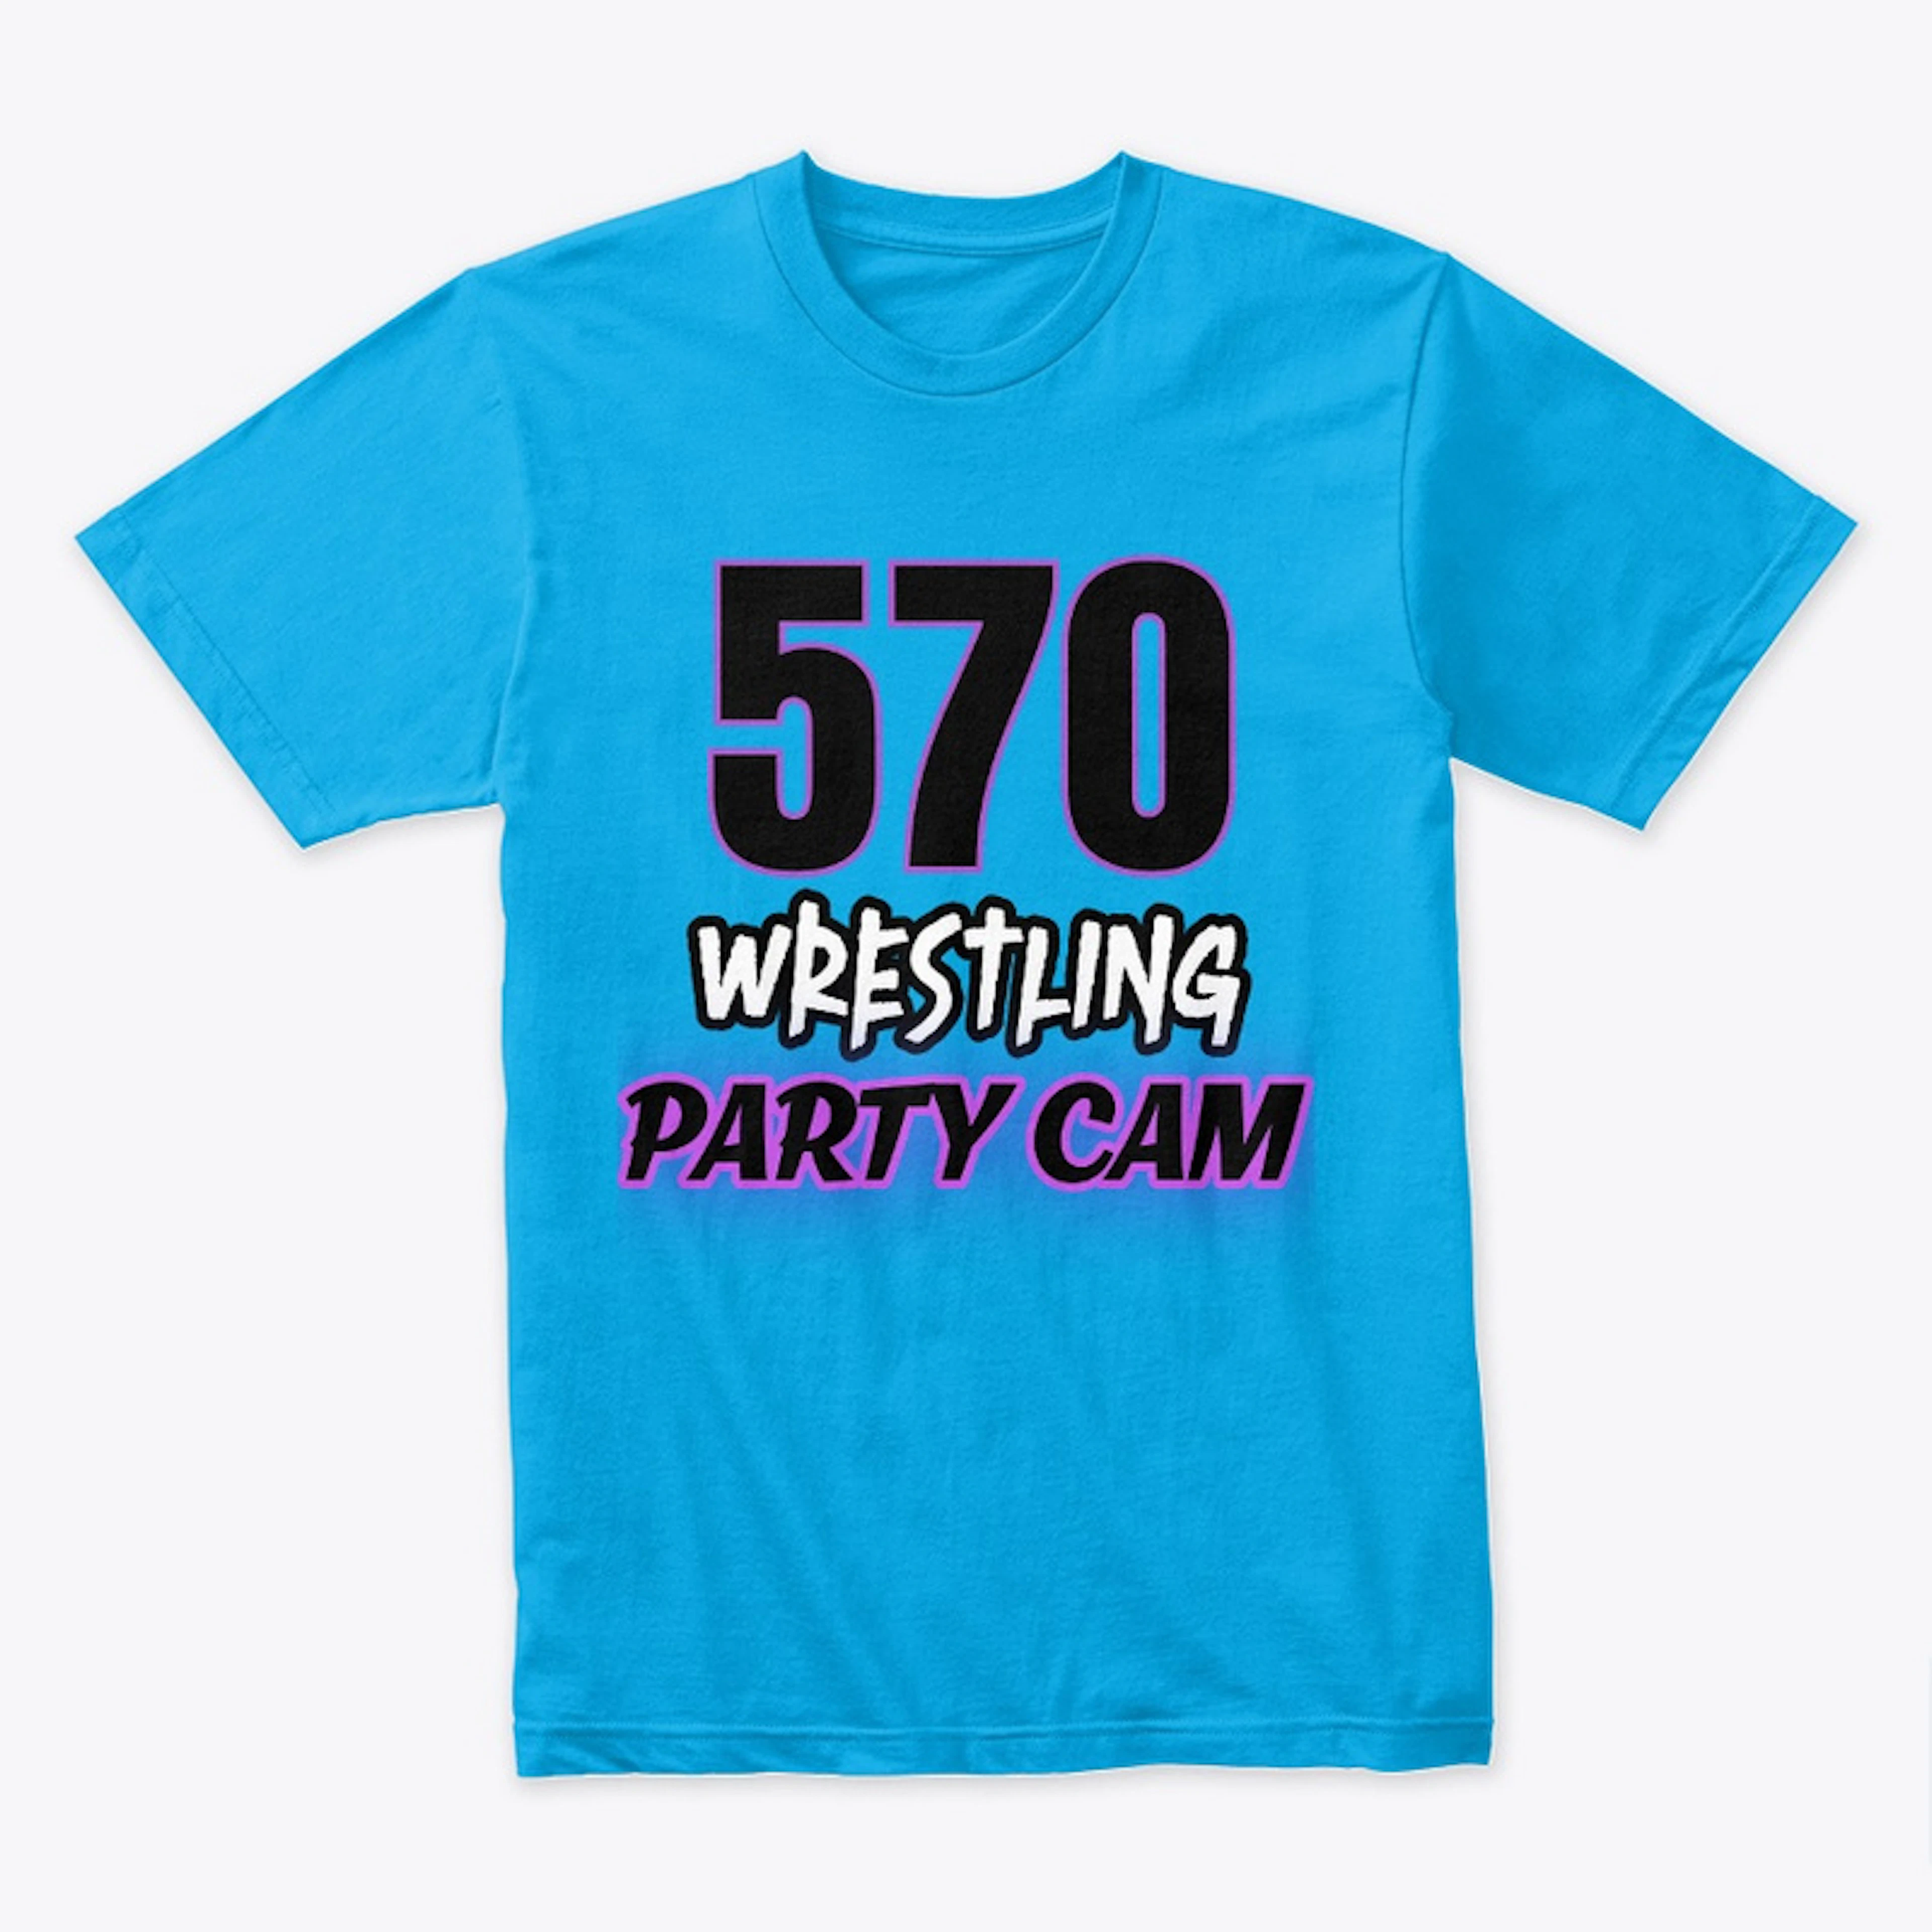 570 Wrestling Party Cam official tee